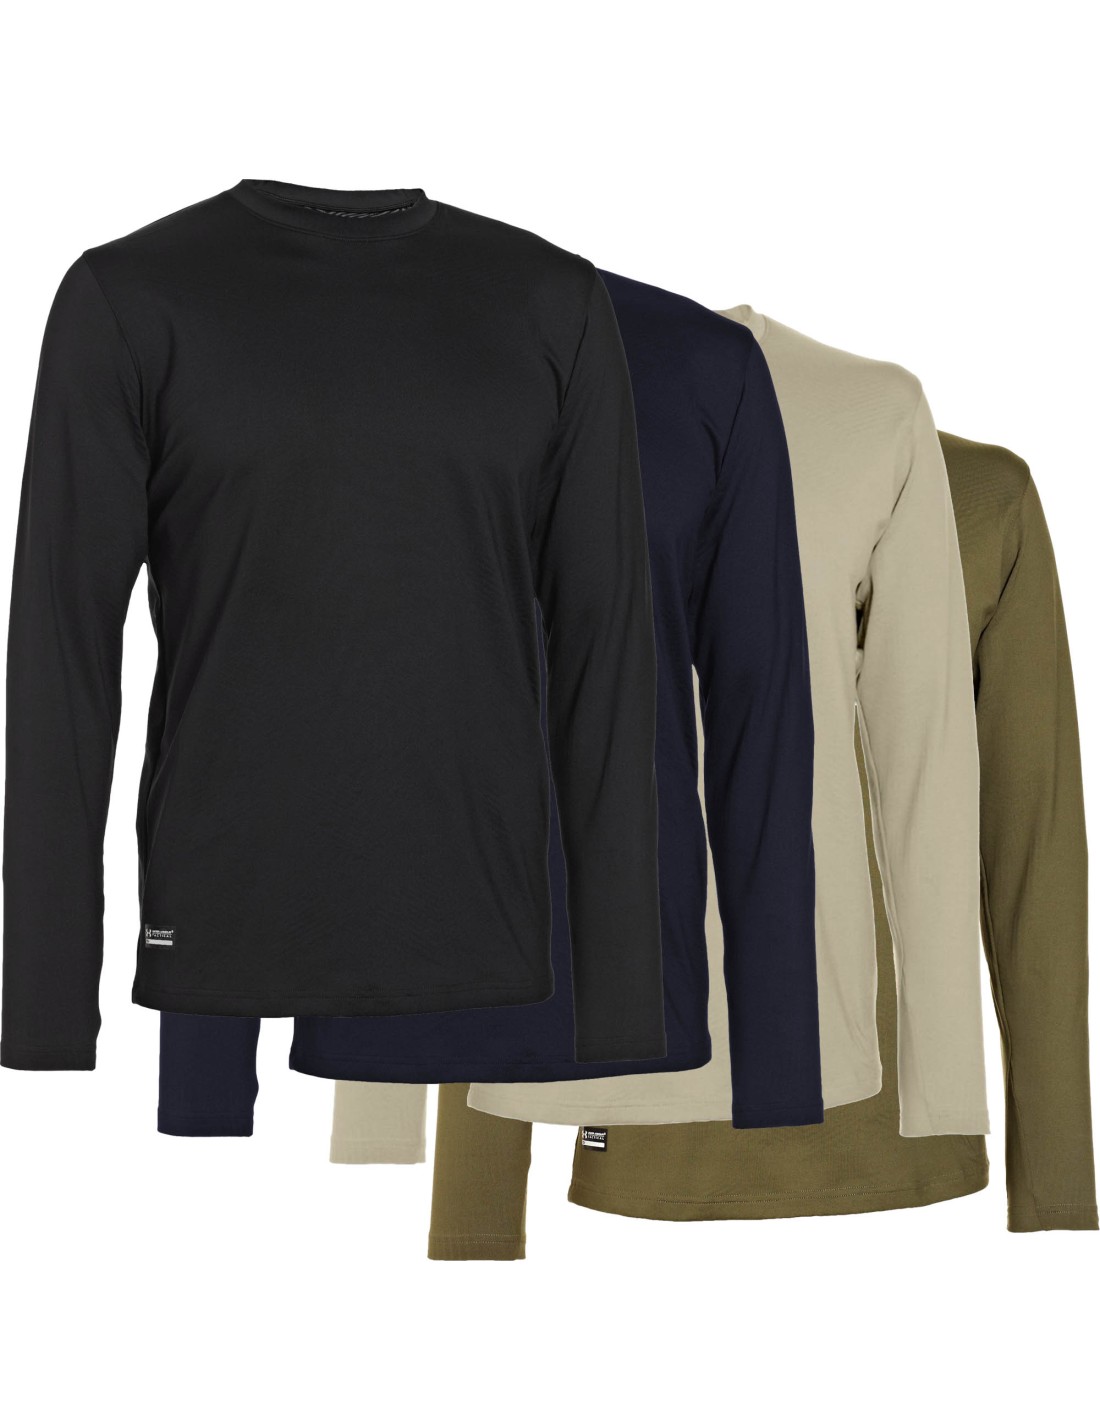 Under Armour® Tactical Crew Shirt ColdGear® langarm, Fitted